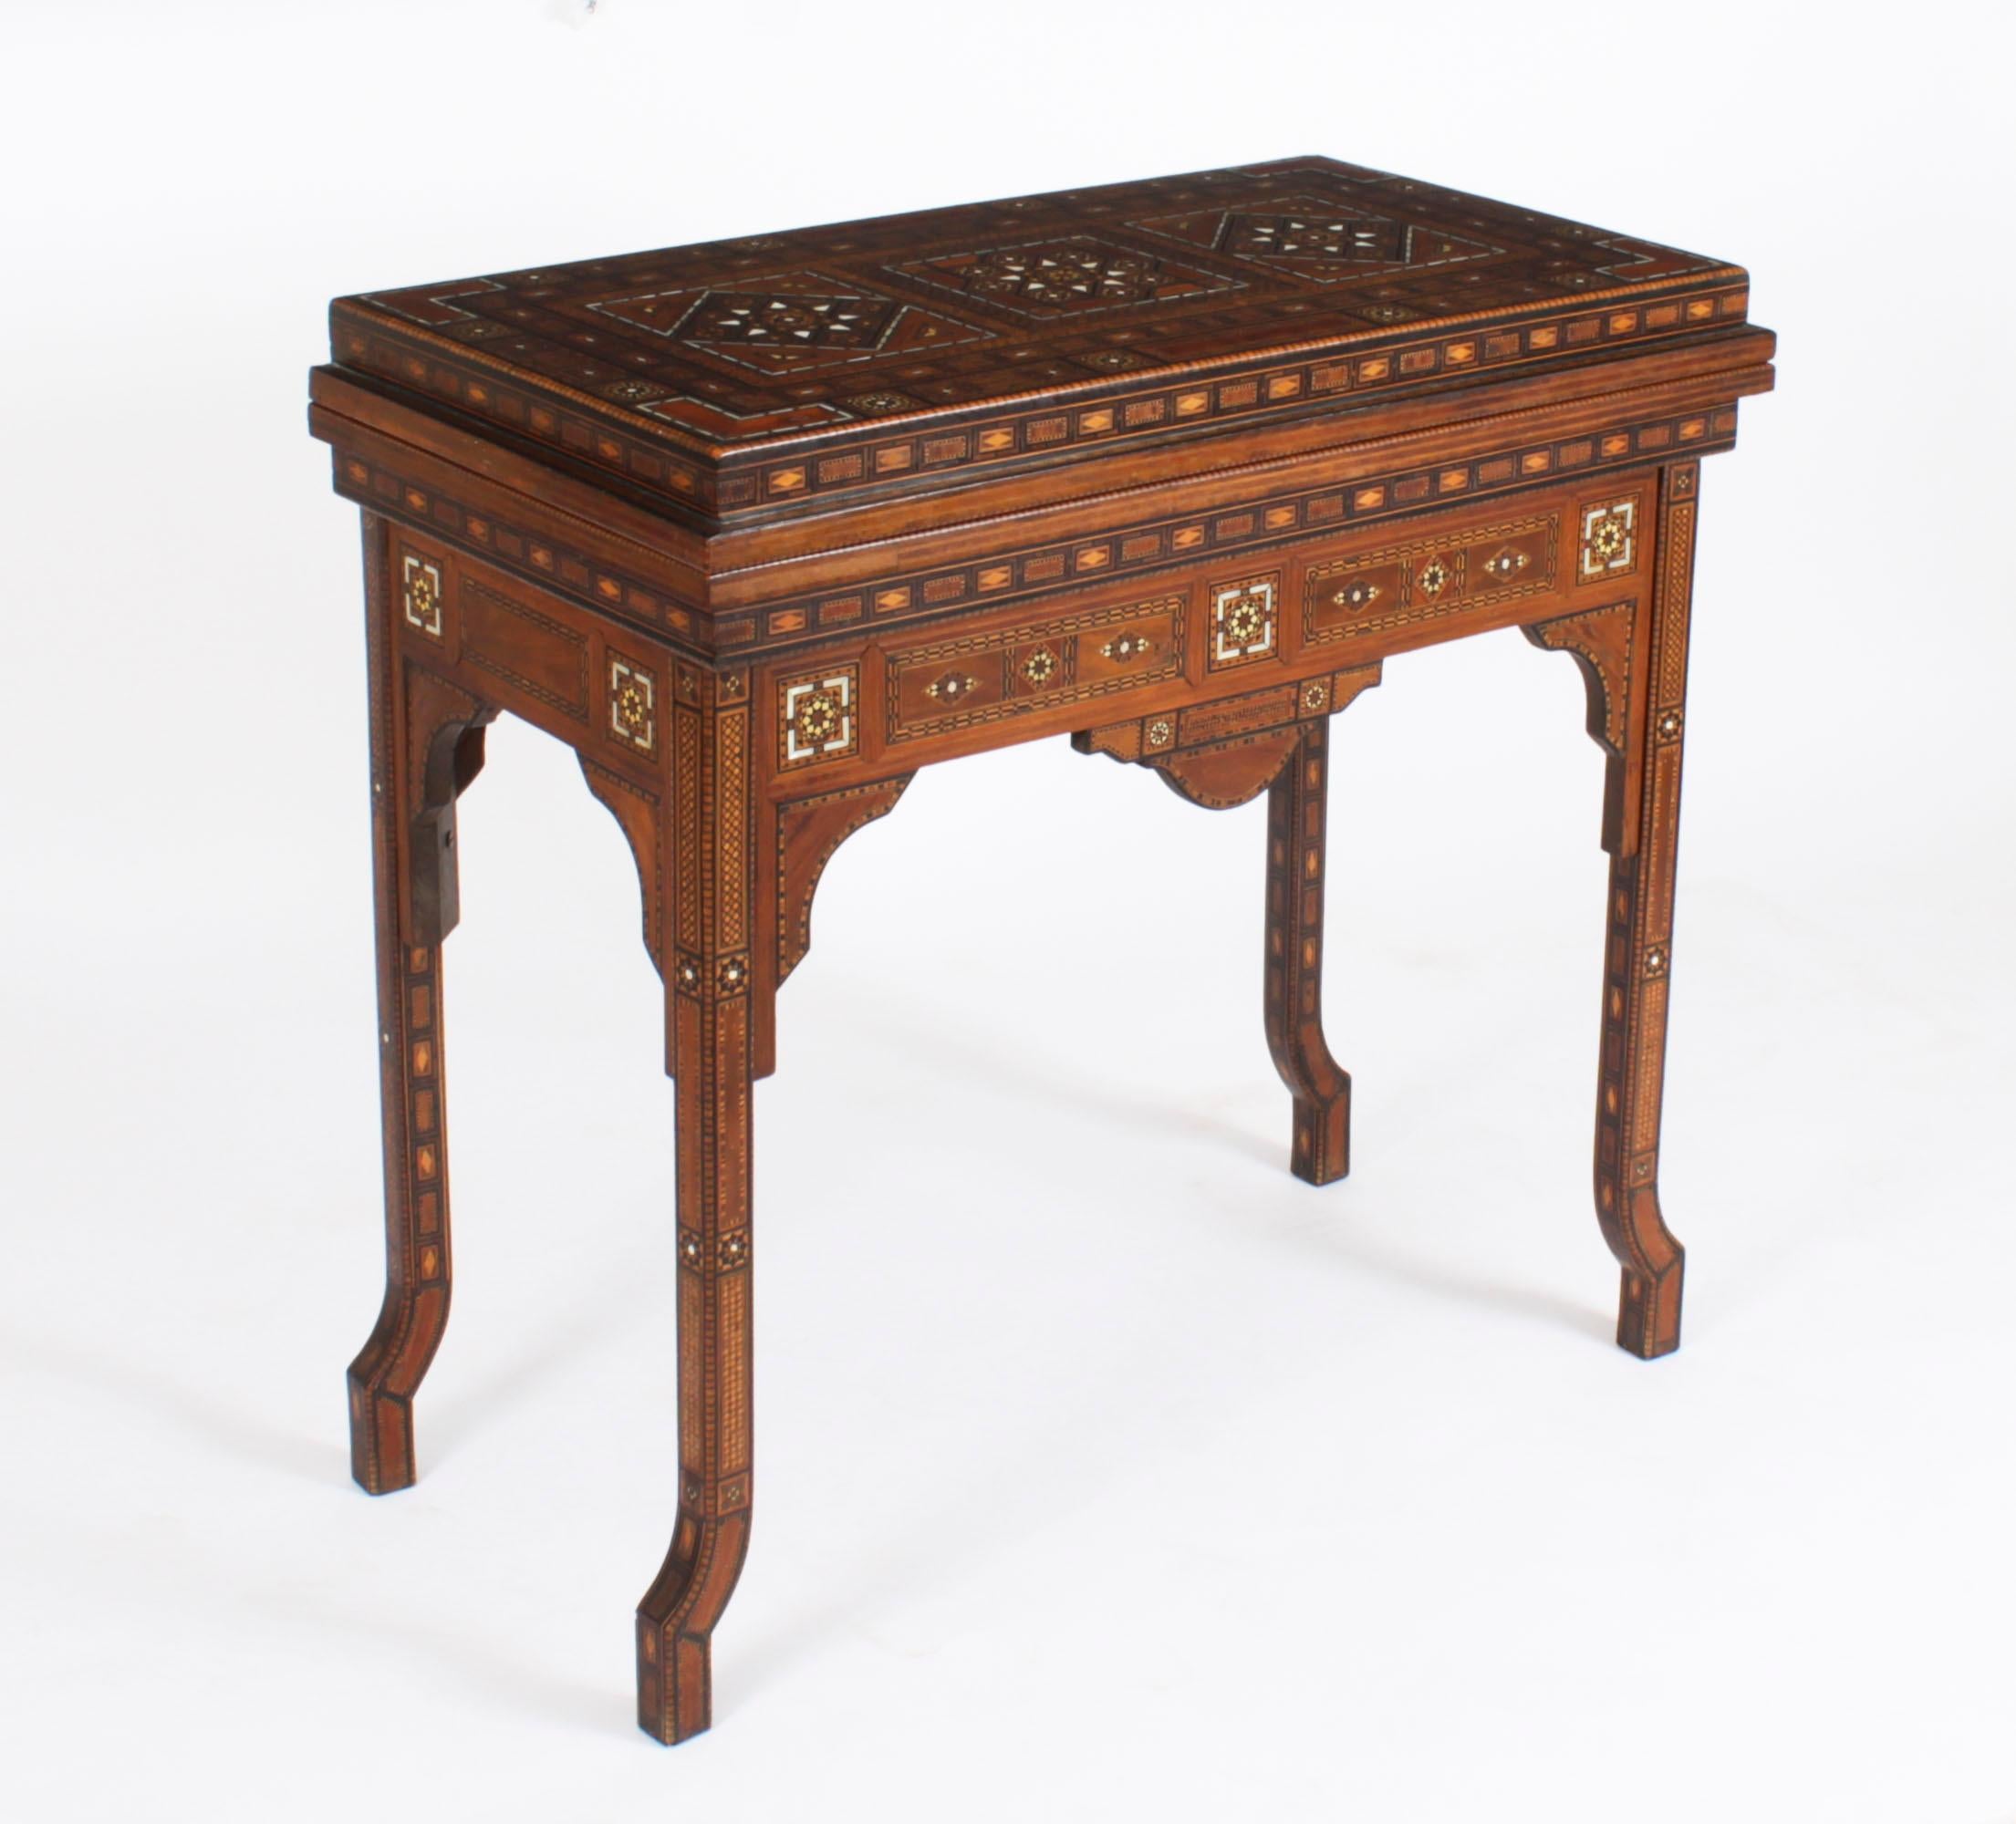 This profusely inlaid Syrian Damascus games table dates from Circa 1900, and has  multiple geometric and asymmetric inlays of various specimen woods

The hinged lid opens to reveal a similarly inlaid interior and a removable reversible top with